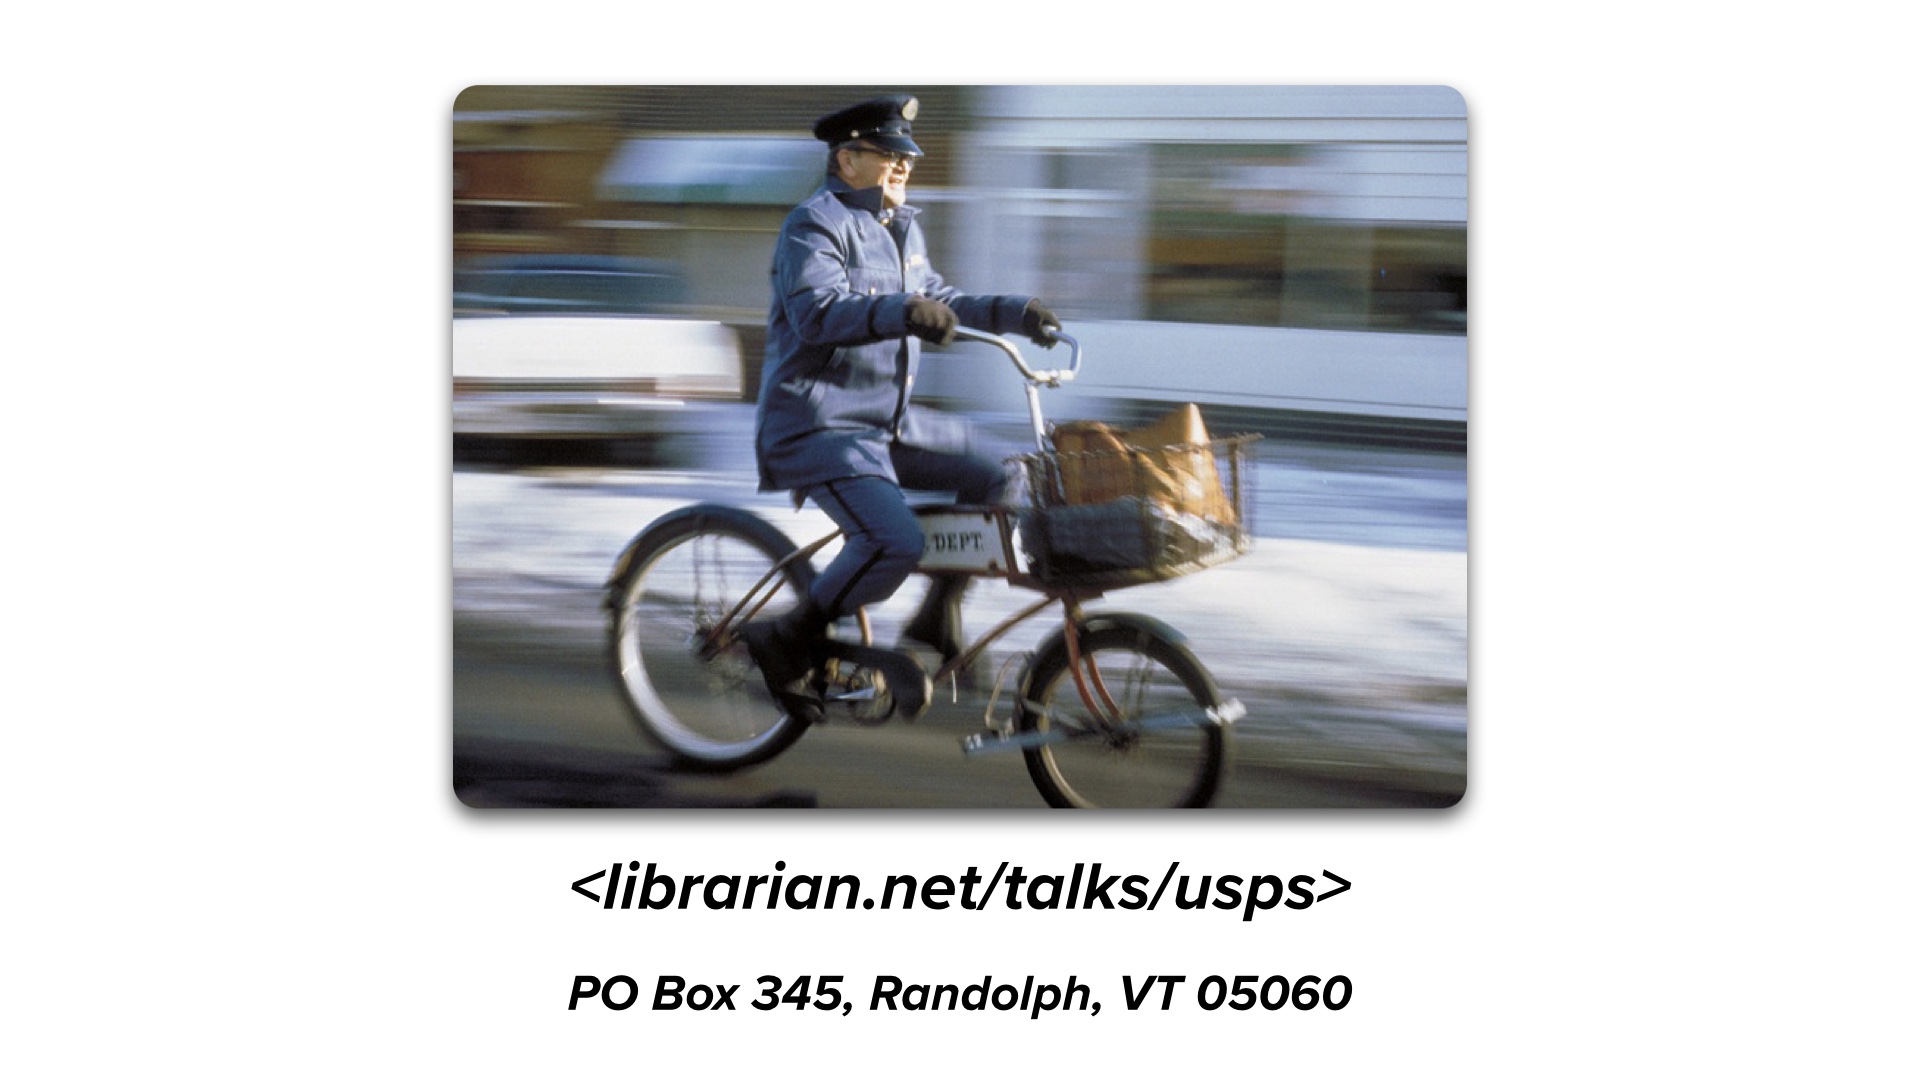 image of post office worker delivering mail by bicycle and my mailing address which is PO Box 345, Randolph VT 05060